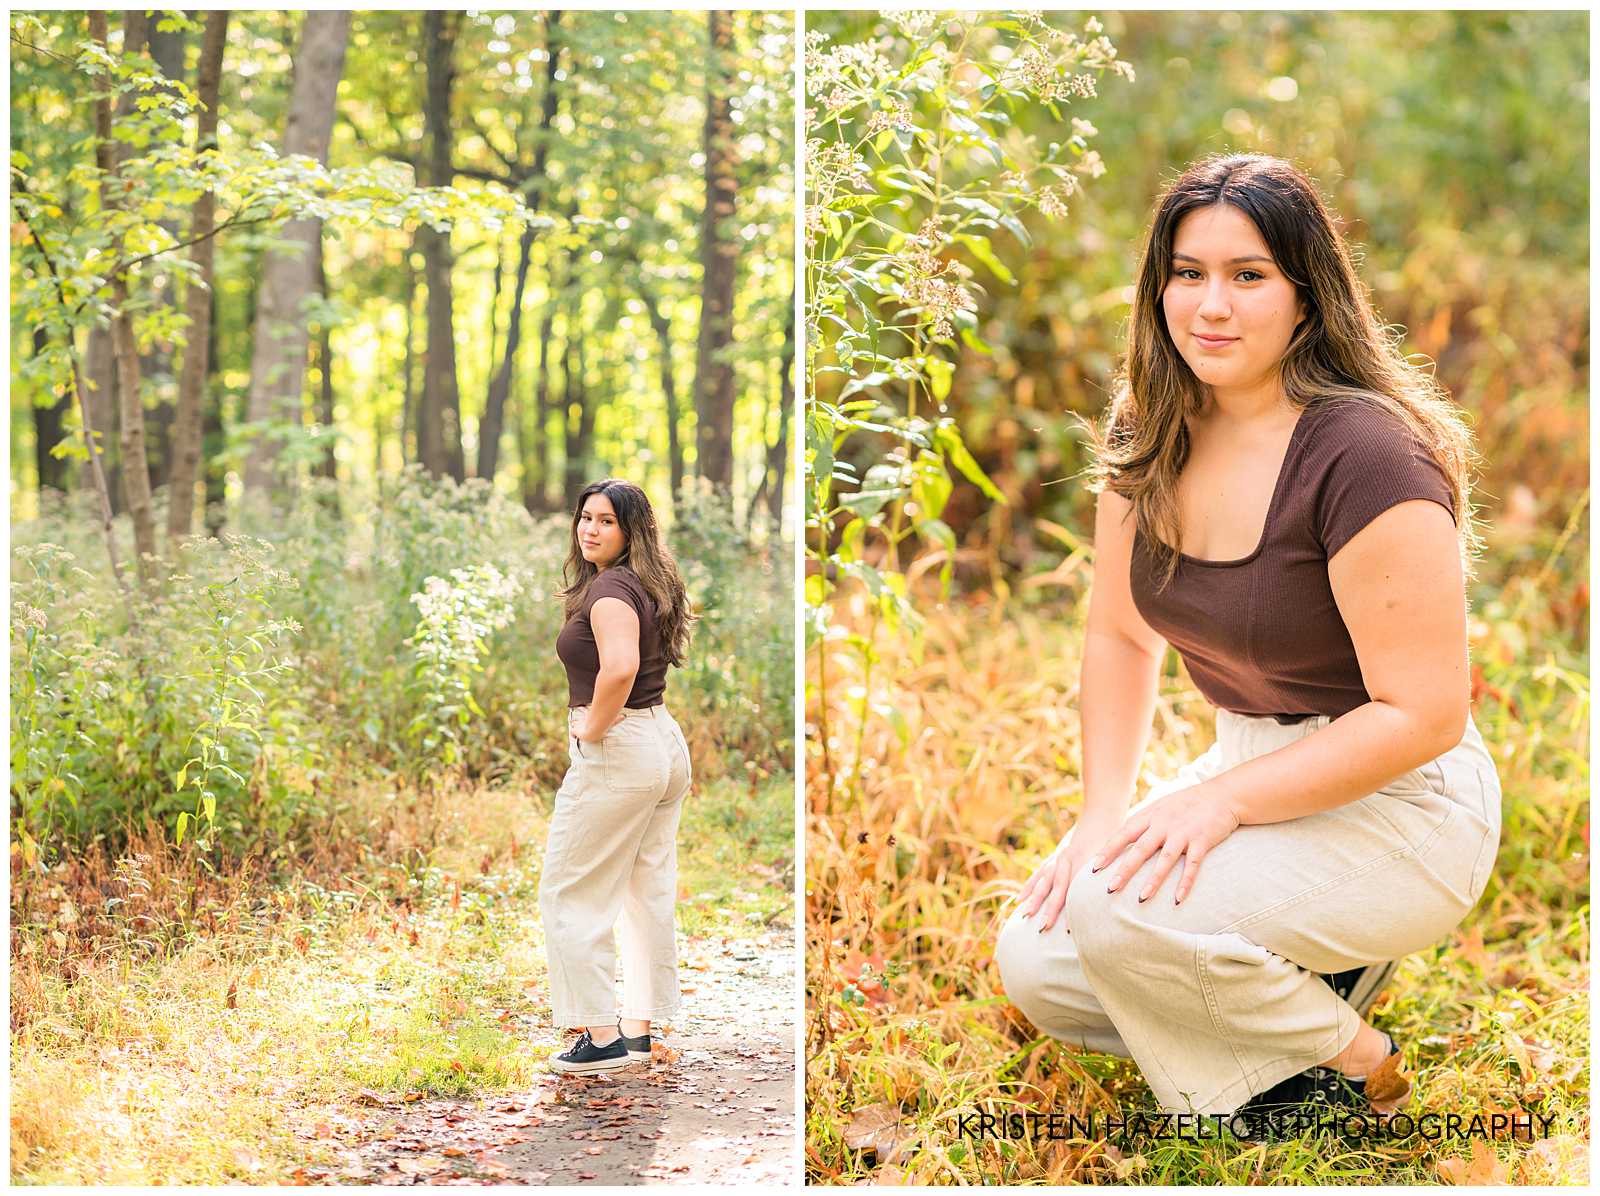 High school senior girl wearing a brown shirt and white pants in the woods by River Forest, IL senior photographer Kristen Hazelton